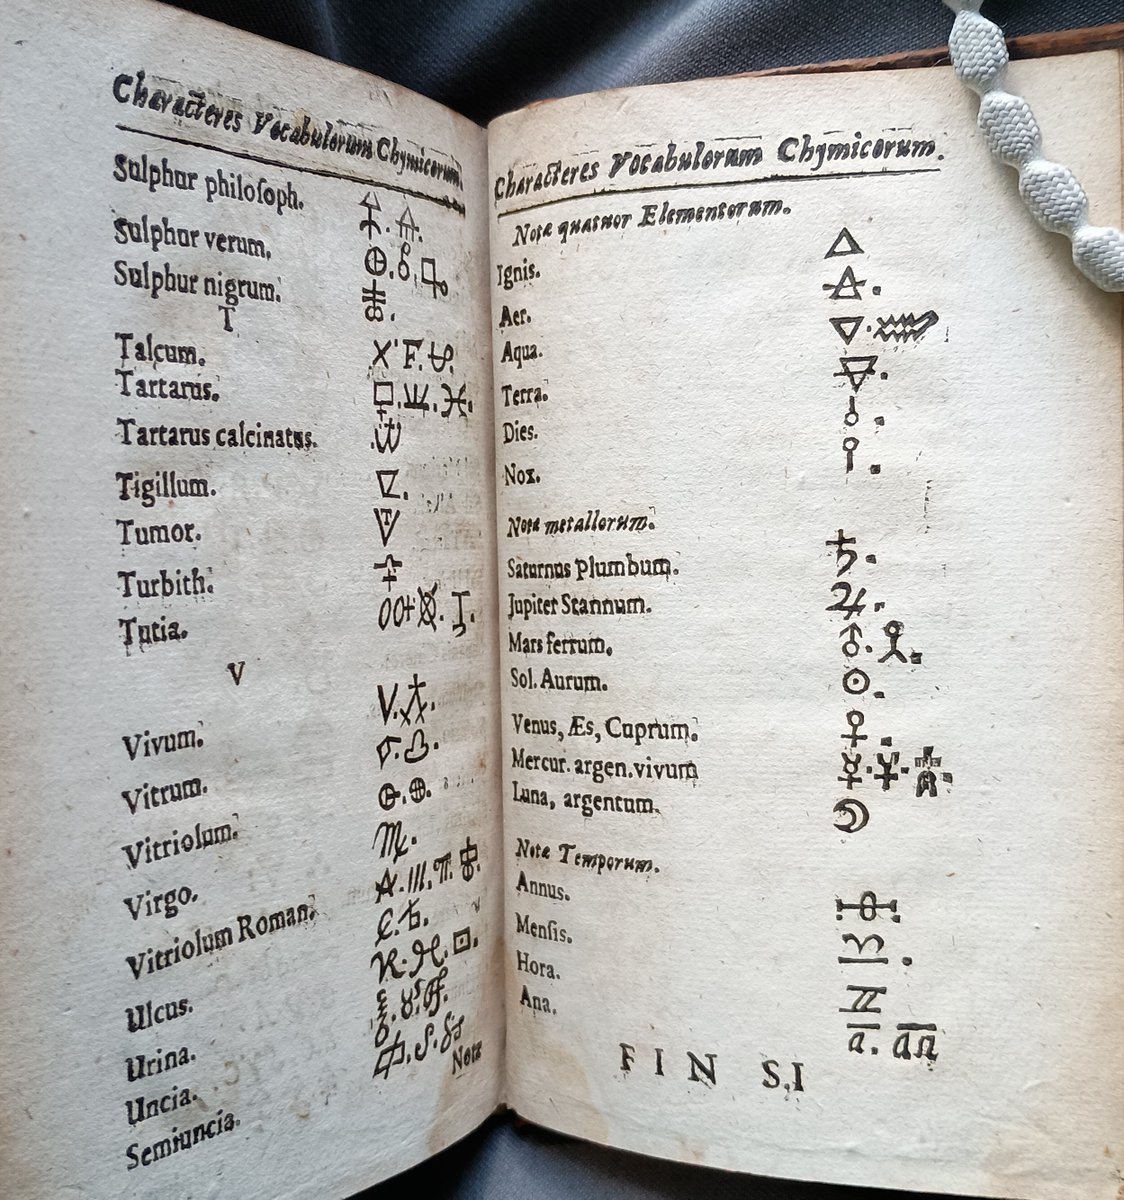 Alchemy symbols and their meaning, from William Johnson's Lexicon chymicum, 1652-53.